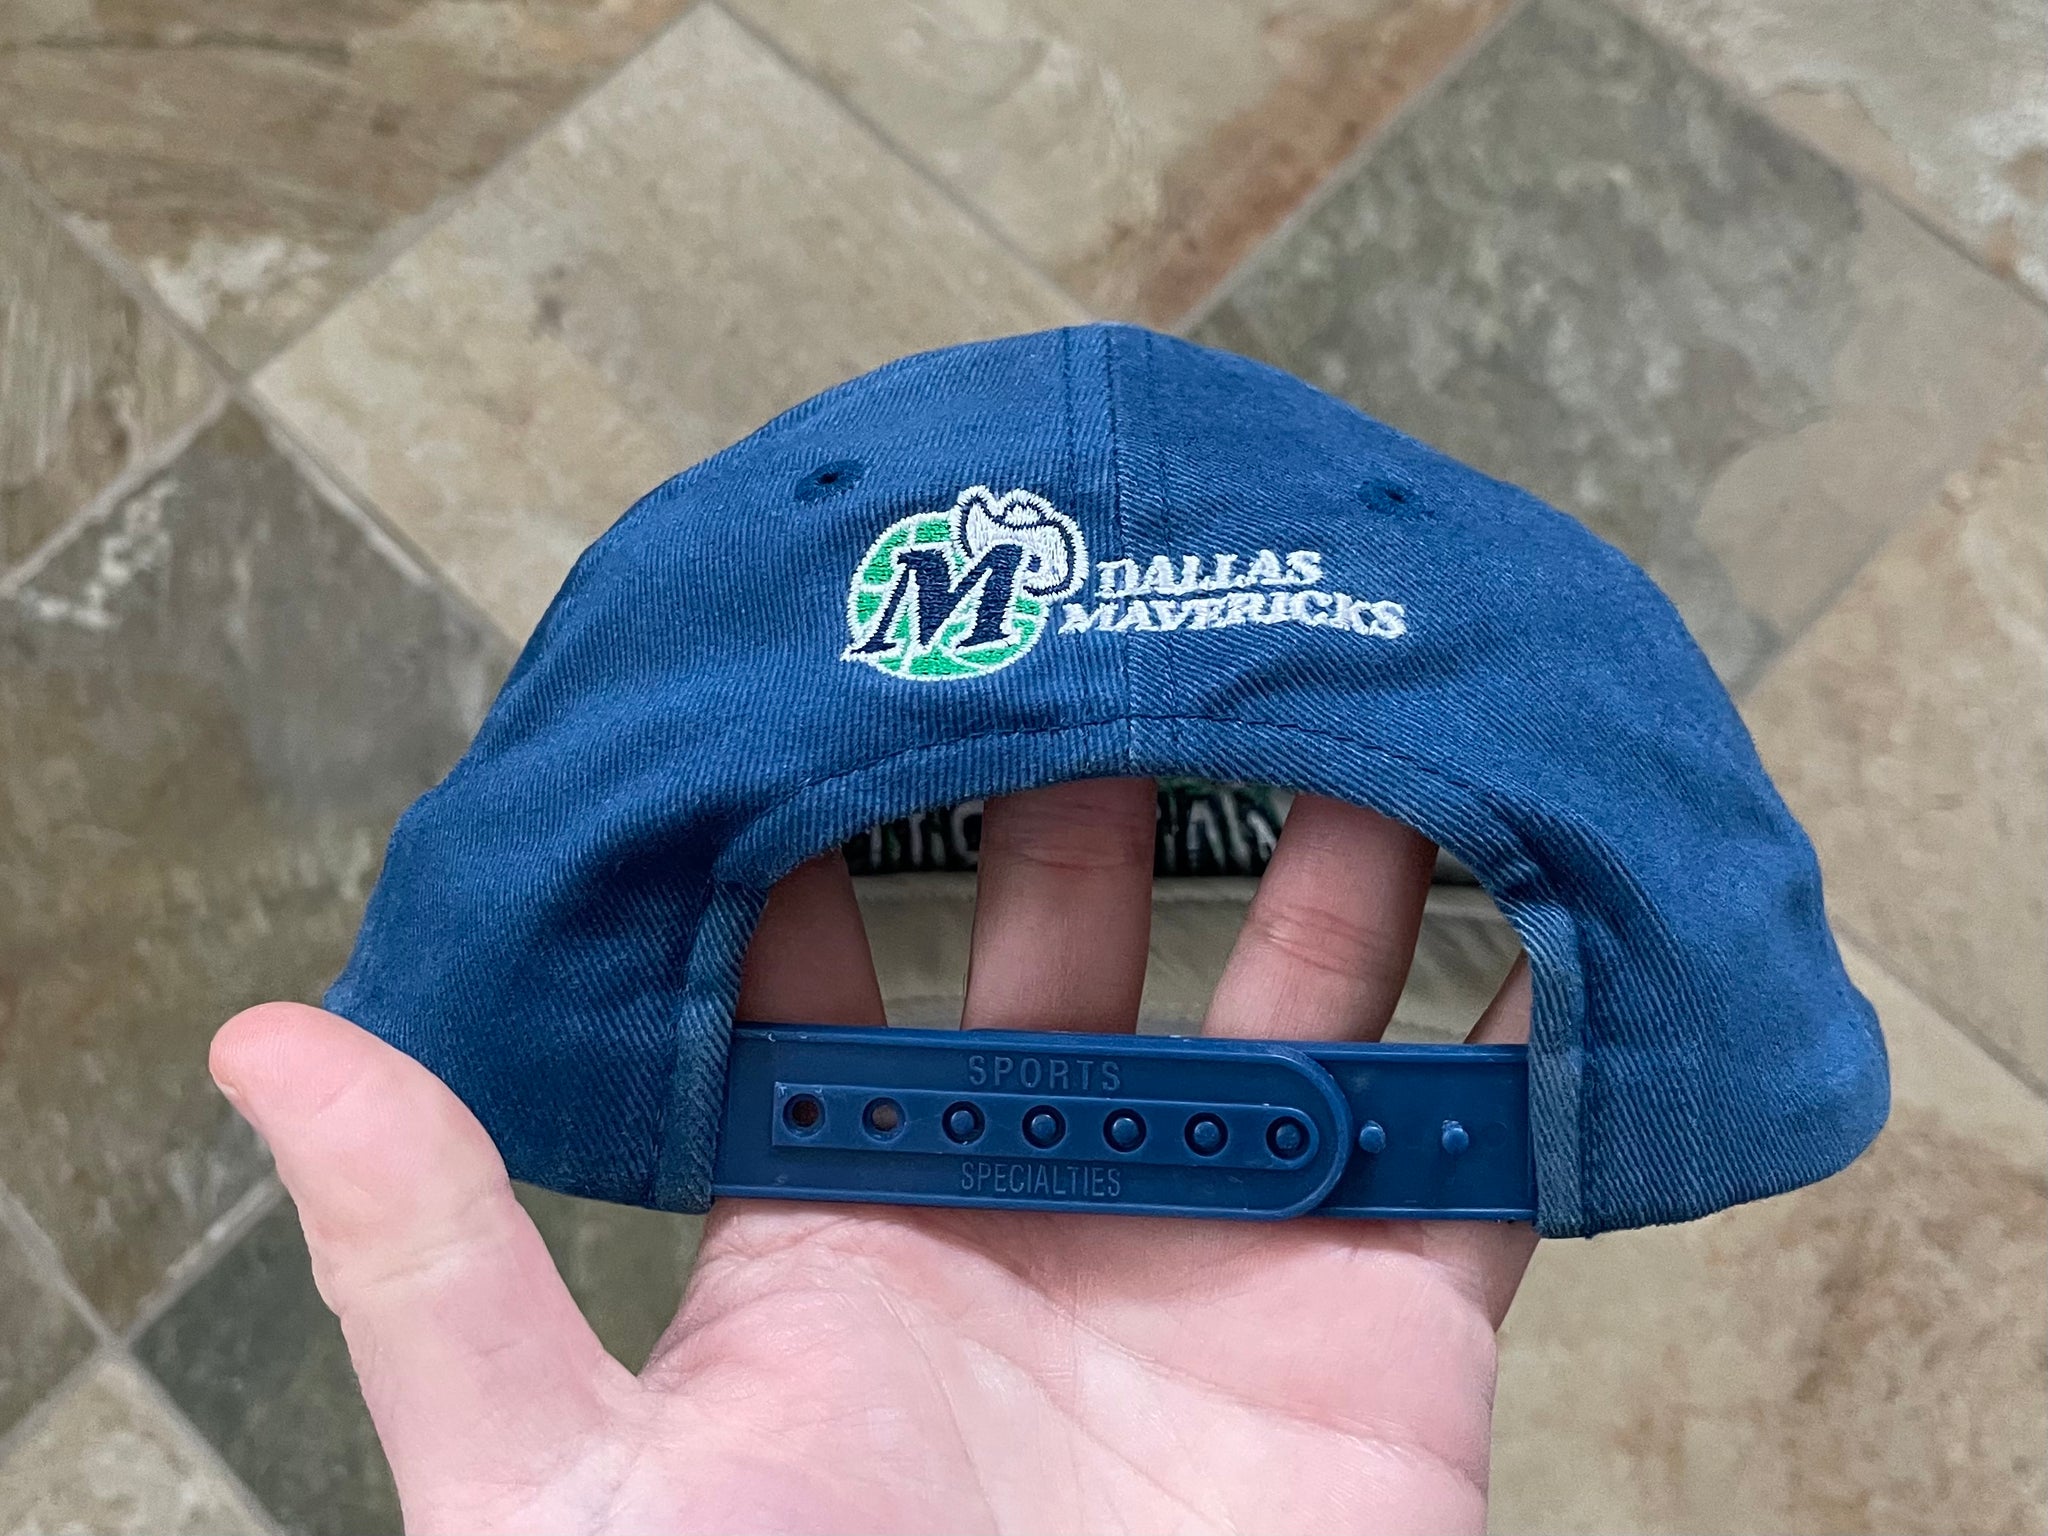 DALLAS MAVERICKS Fitted Vintage Hat Cap Fitted Size S/m 